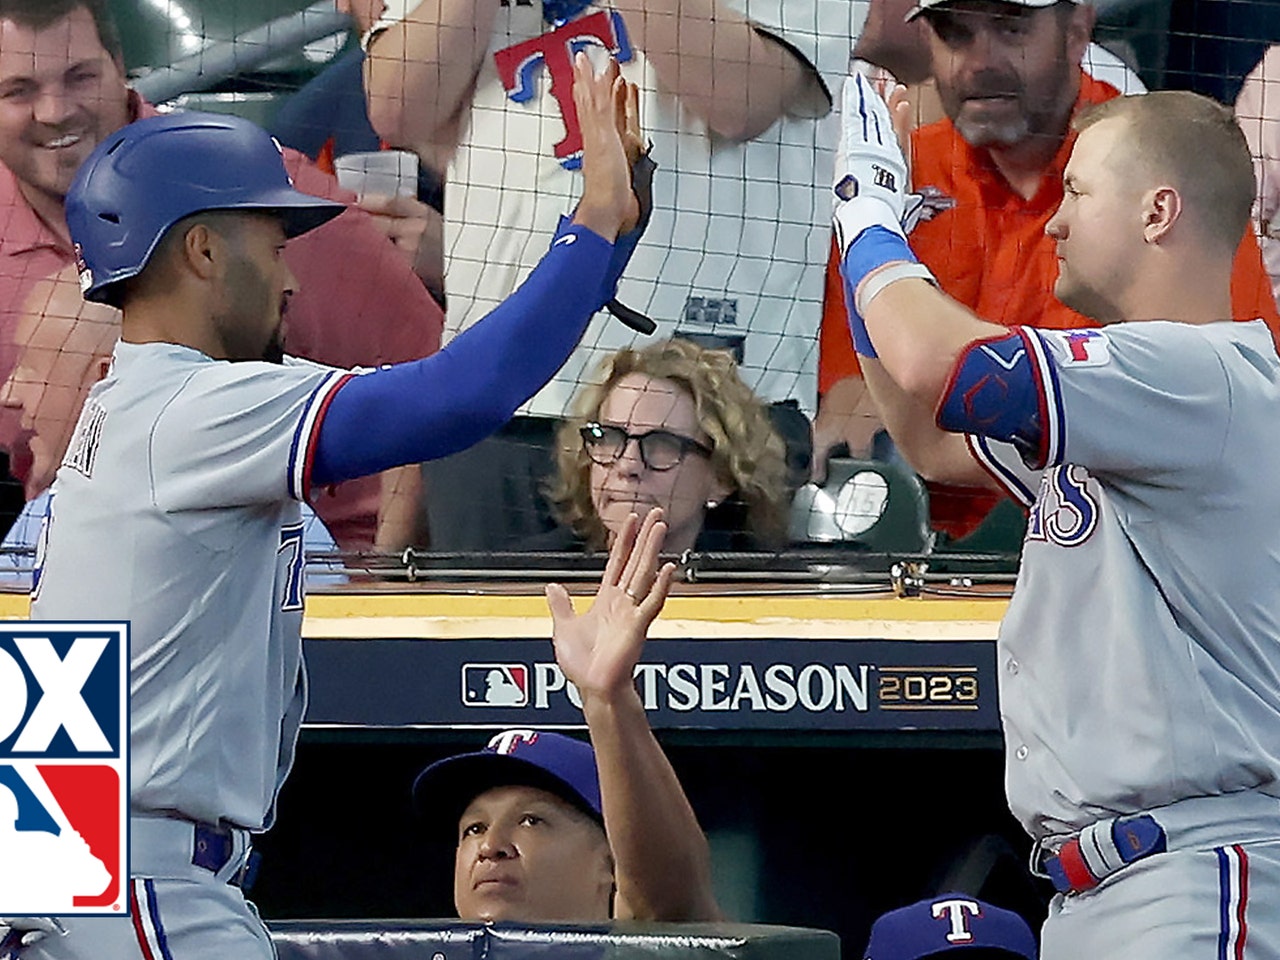 Rangers' Adolis García, Mitch Garver and Nathaniel Lowe all smack RBI base  hits to score FOUR runs against Astros in first inning